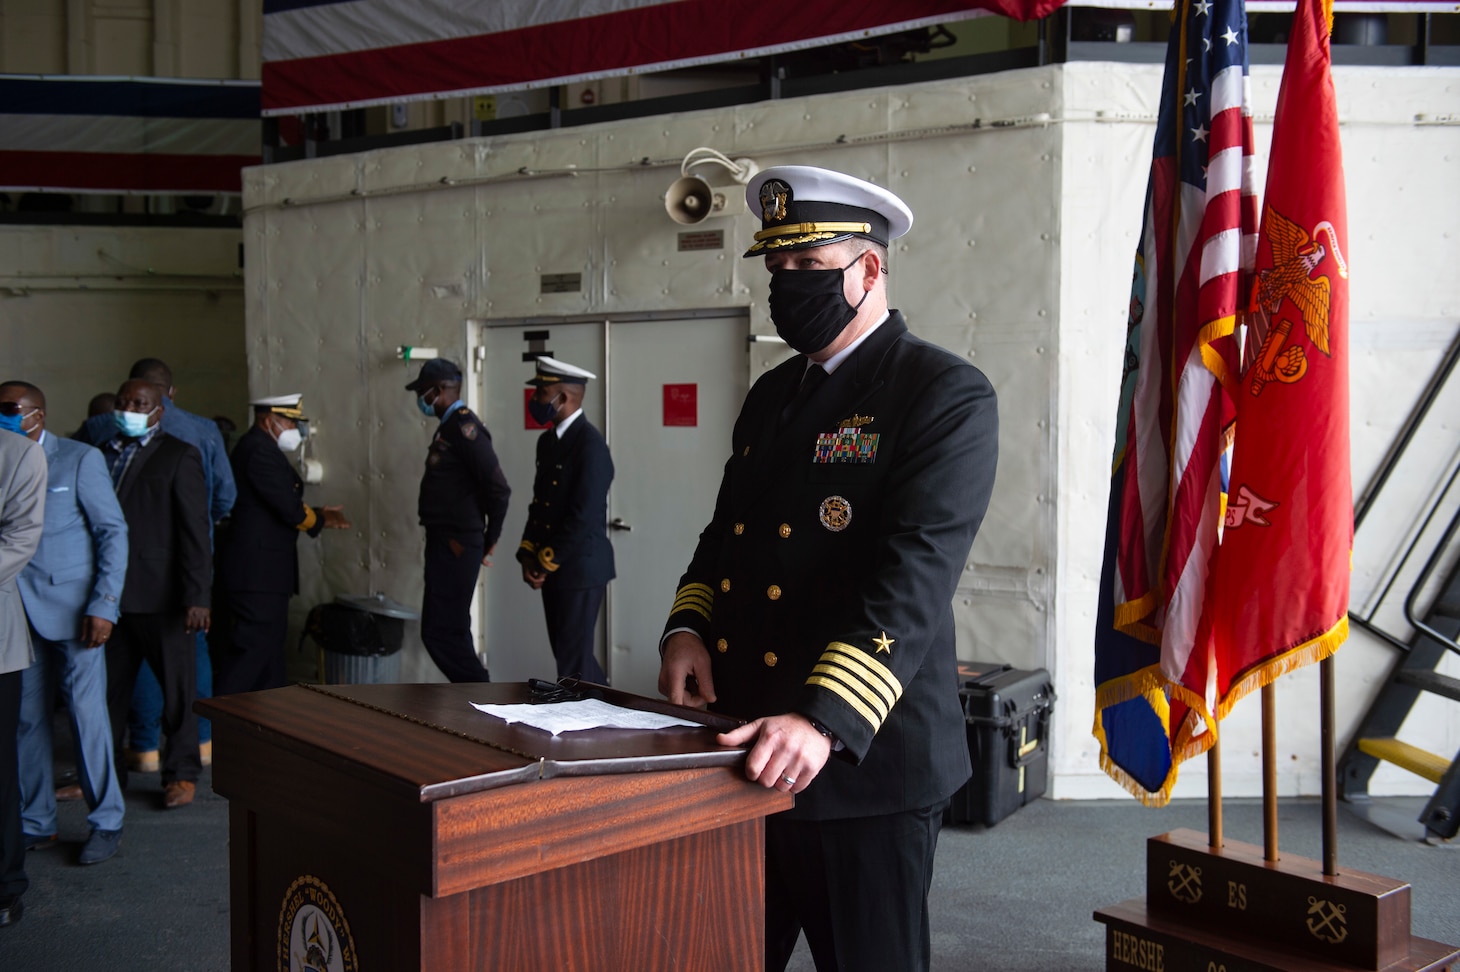 Capt. Chad W. Graham, commanding officer, USS Hershel "Woody" Williams, addresses a reception for Namibian Navy leadership and U.S. embassy personnel following a tour aboard the Expeditionary Sea Base USS Hershel "Woody" Williams (ESB 4), Sept. 17, 2021.